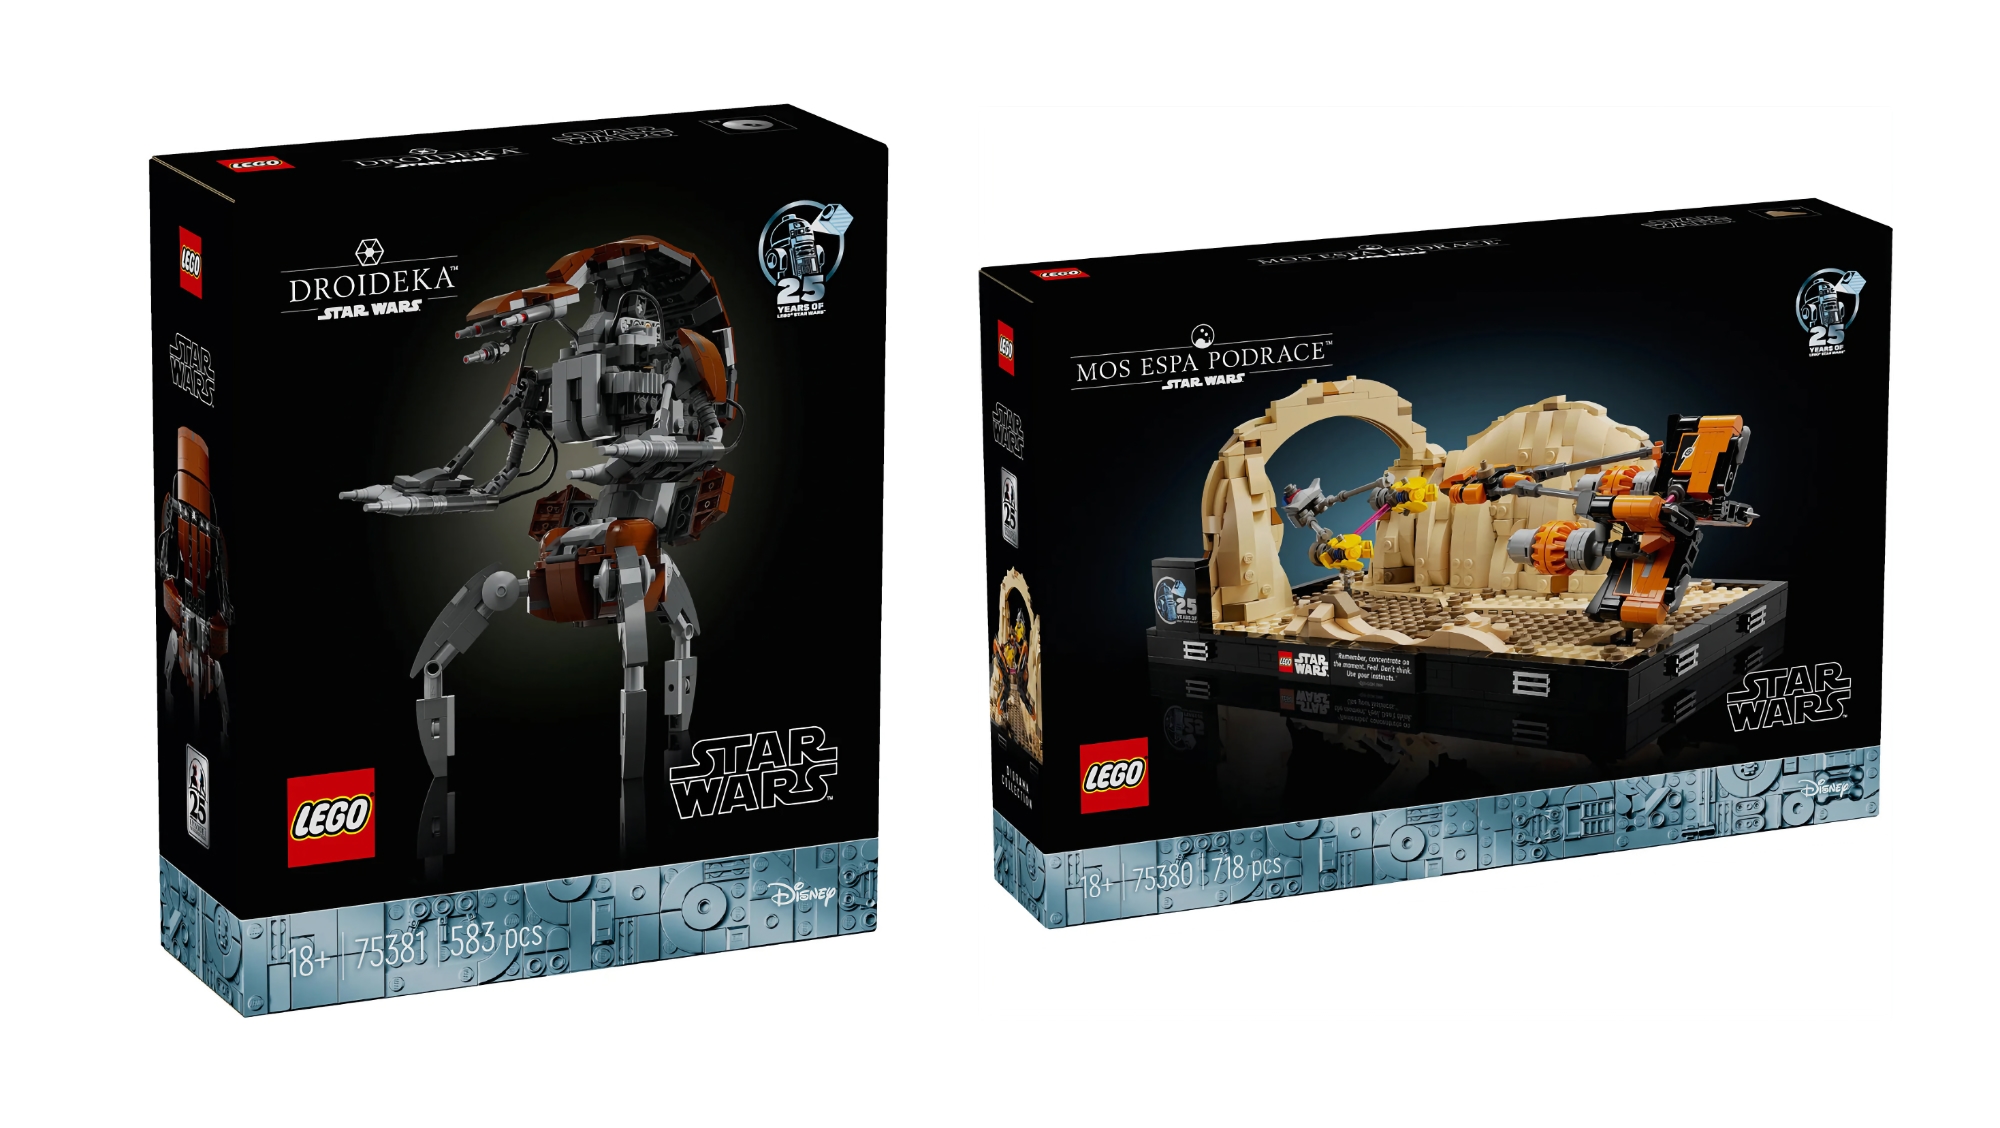 Mos espa Podrace and Droideka: LEGO will release two new sets for Star Wars fans in May